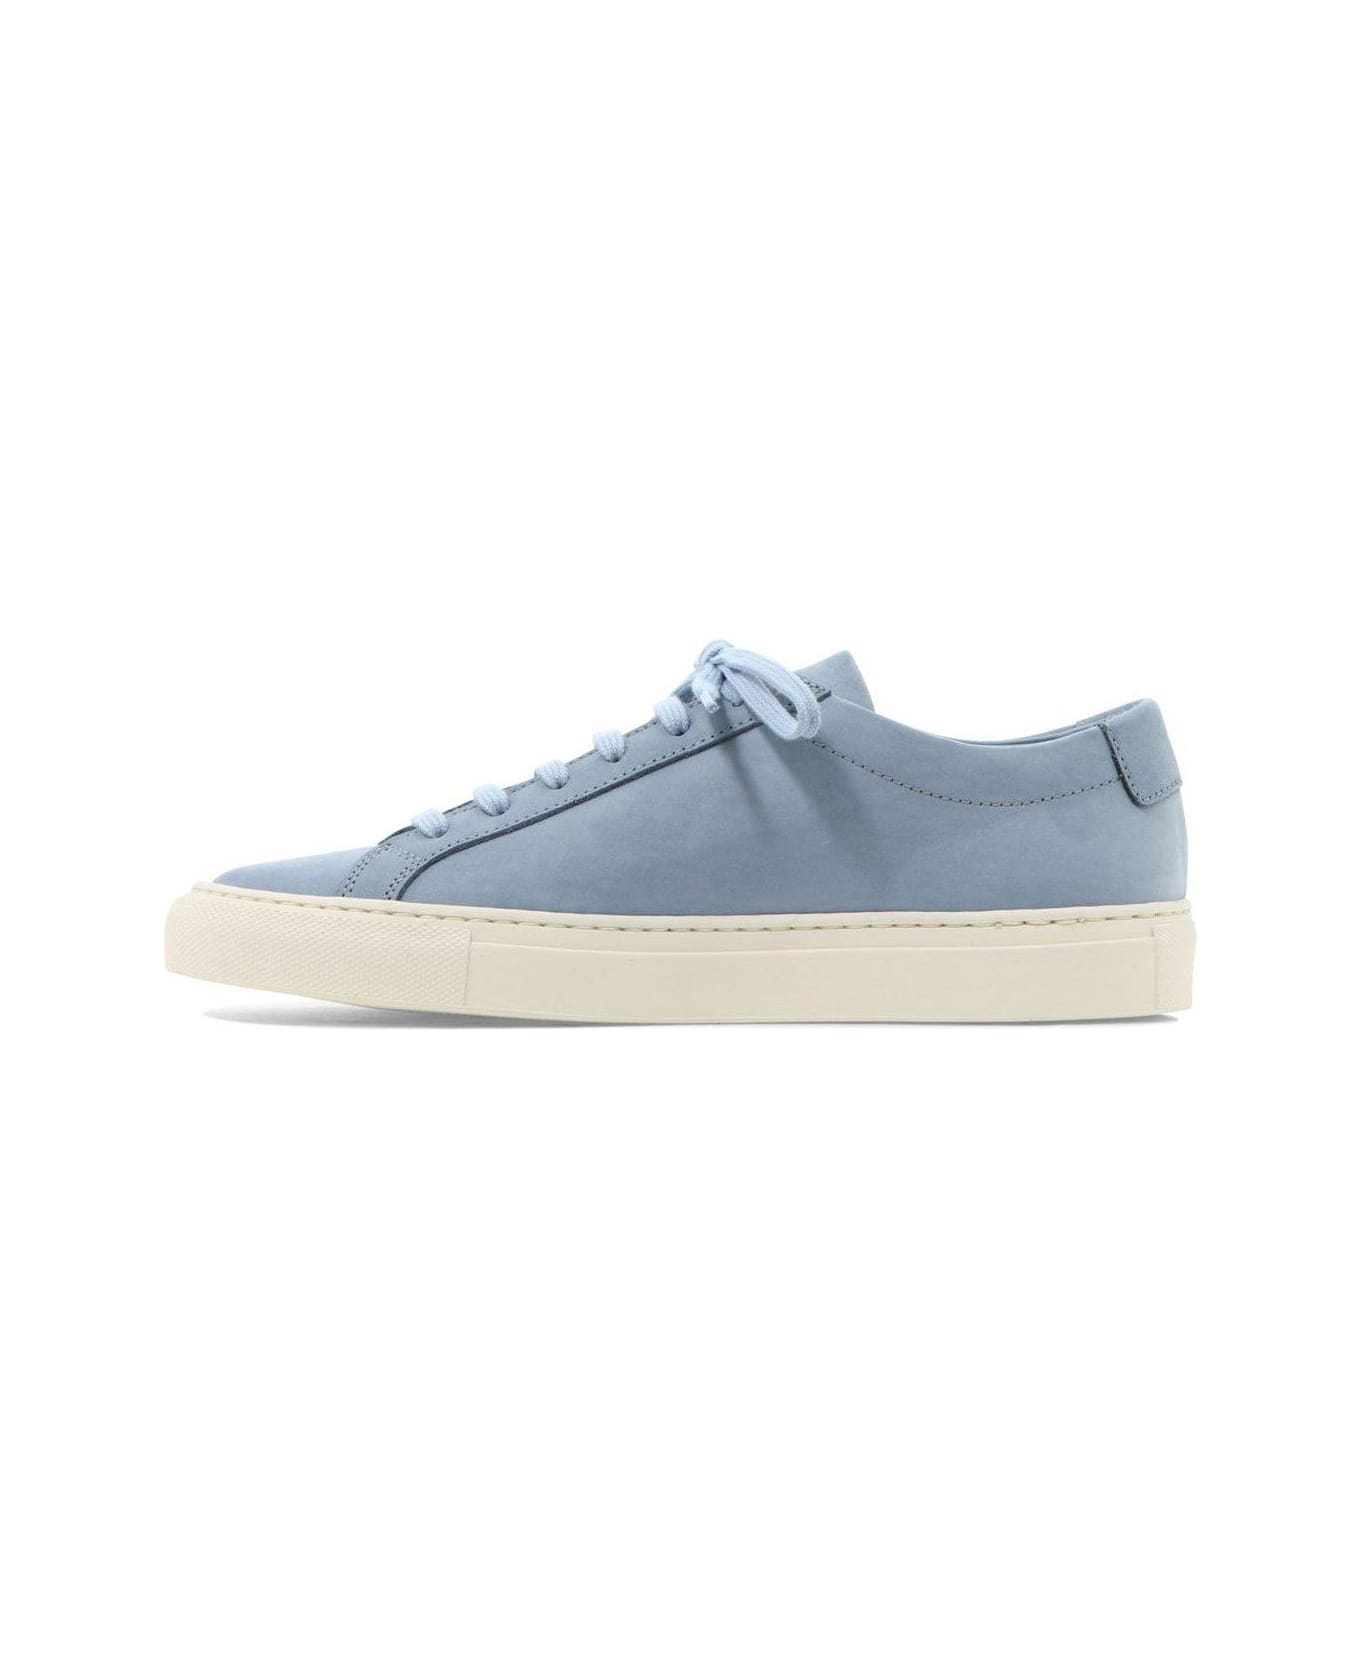 Common Projects Achilles Low-top Sneakers - Blue スニーカー